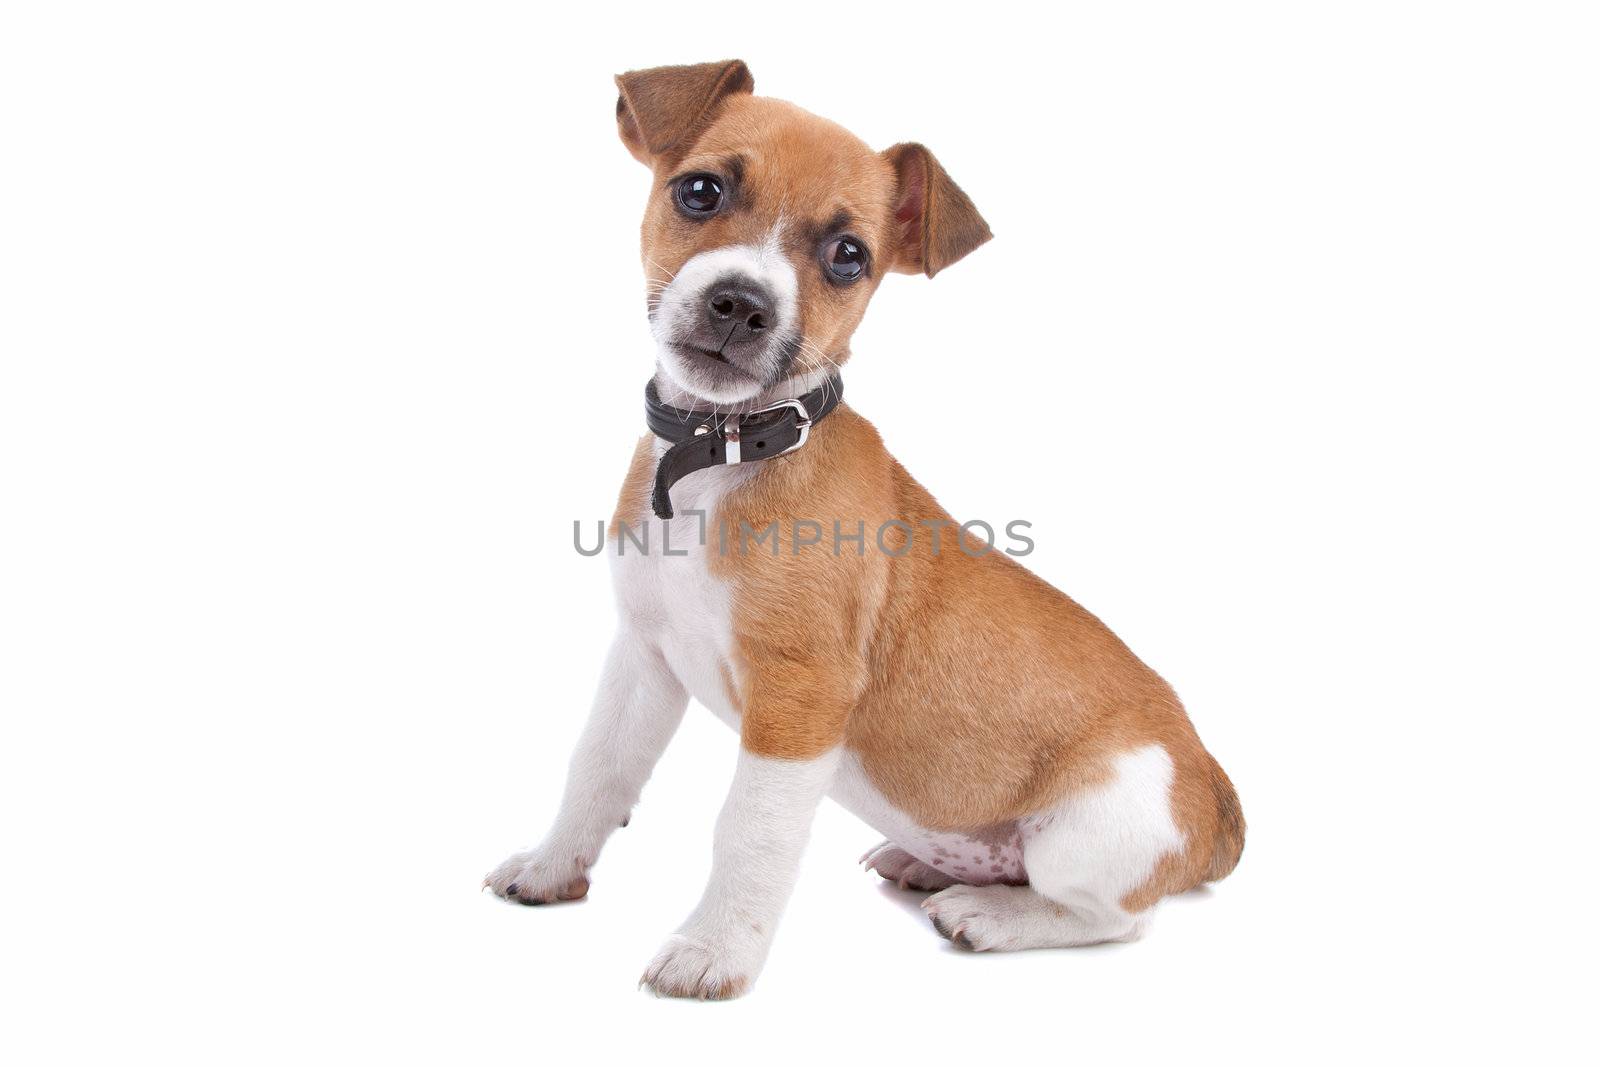 Cute Jack Russel Terrier puppy sitting, isolated on a white background